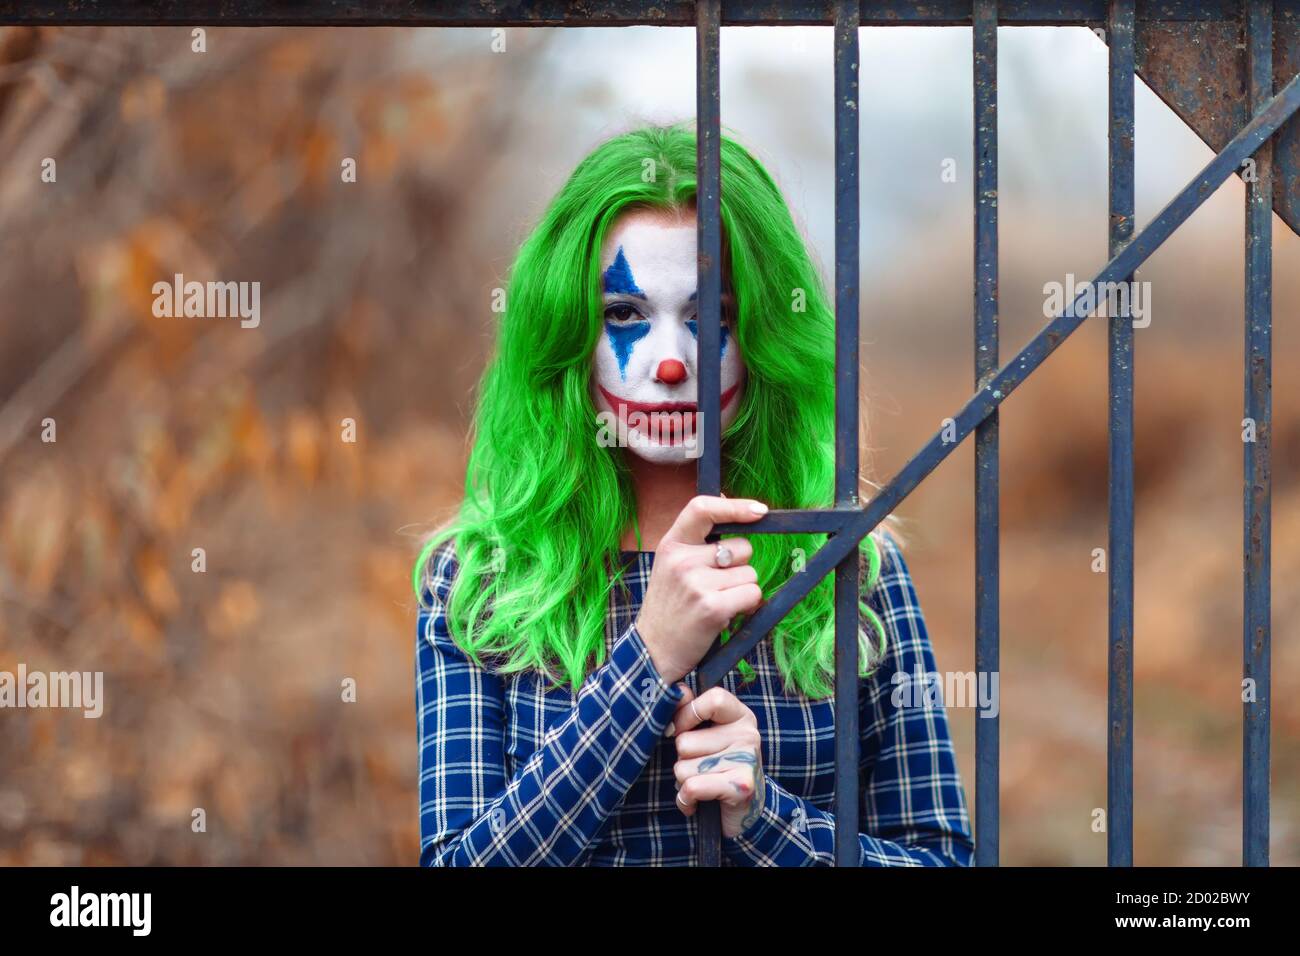 Close-up portrait of a greenhaired girl in chekered dress with joker makeup on a blurry brown background. Stock Photo